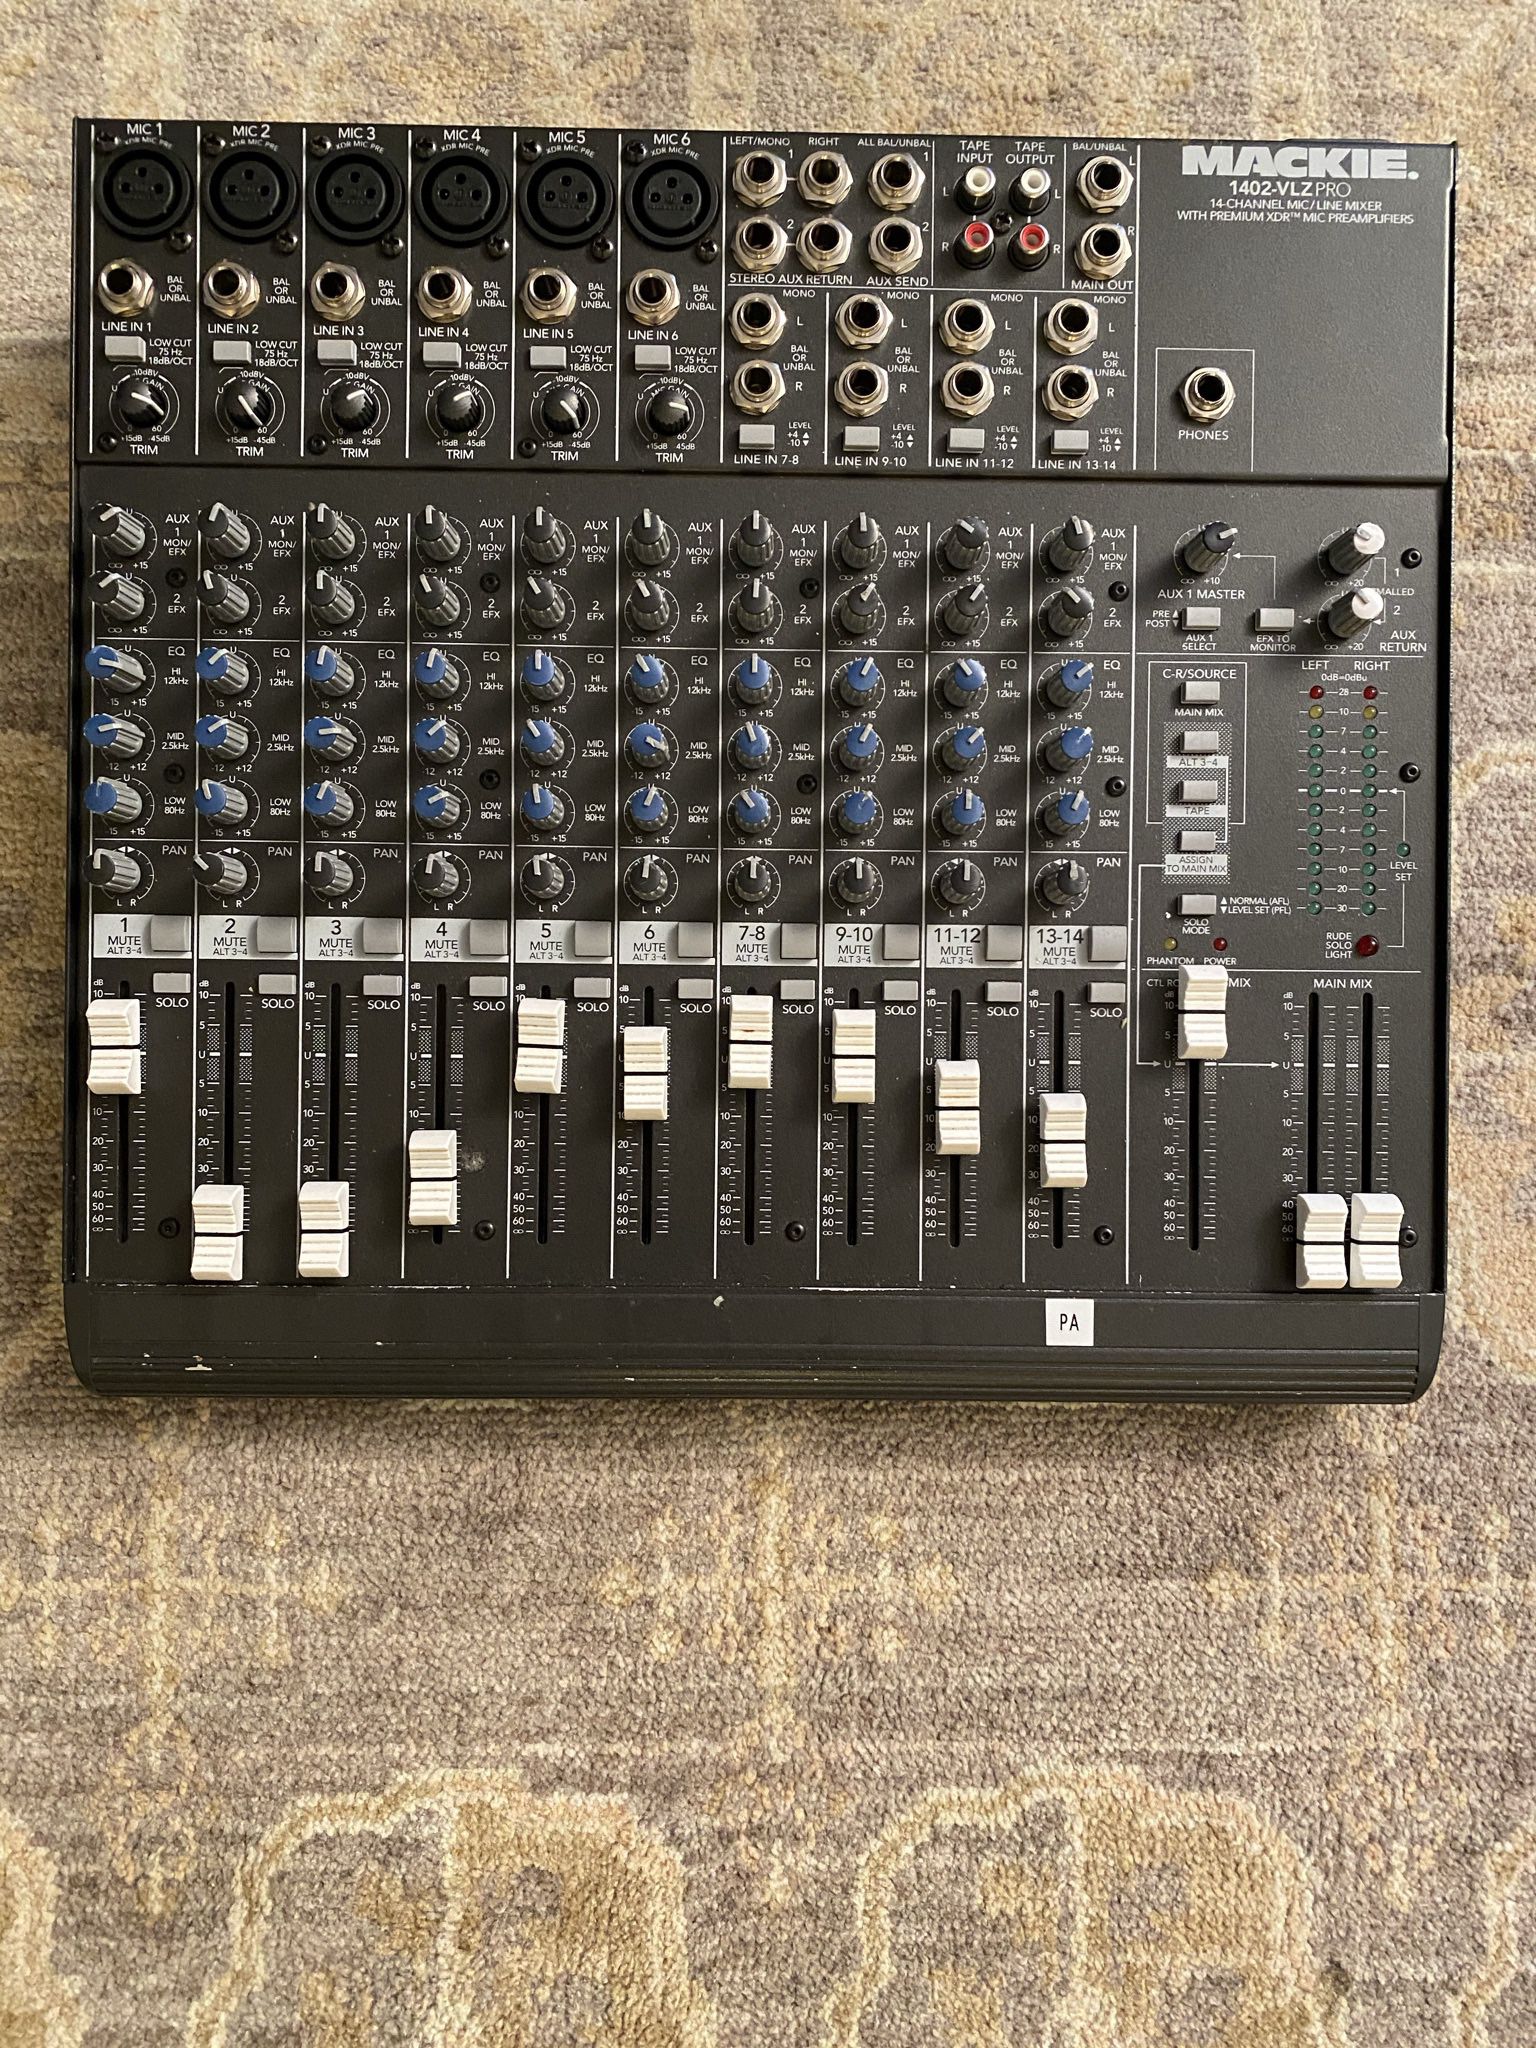 Mackie 1402-VLZ PRO 14-Channel Mic/Line Mixer for Sale in Euclid